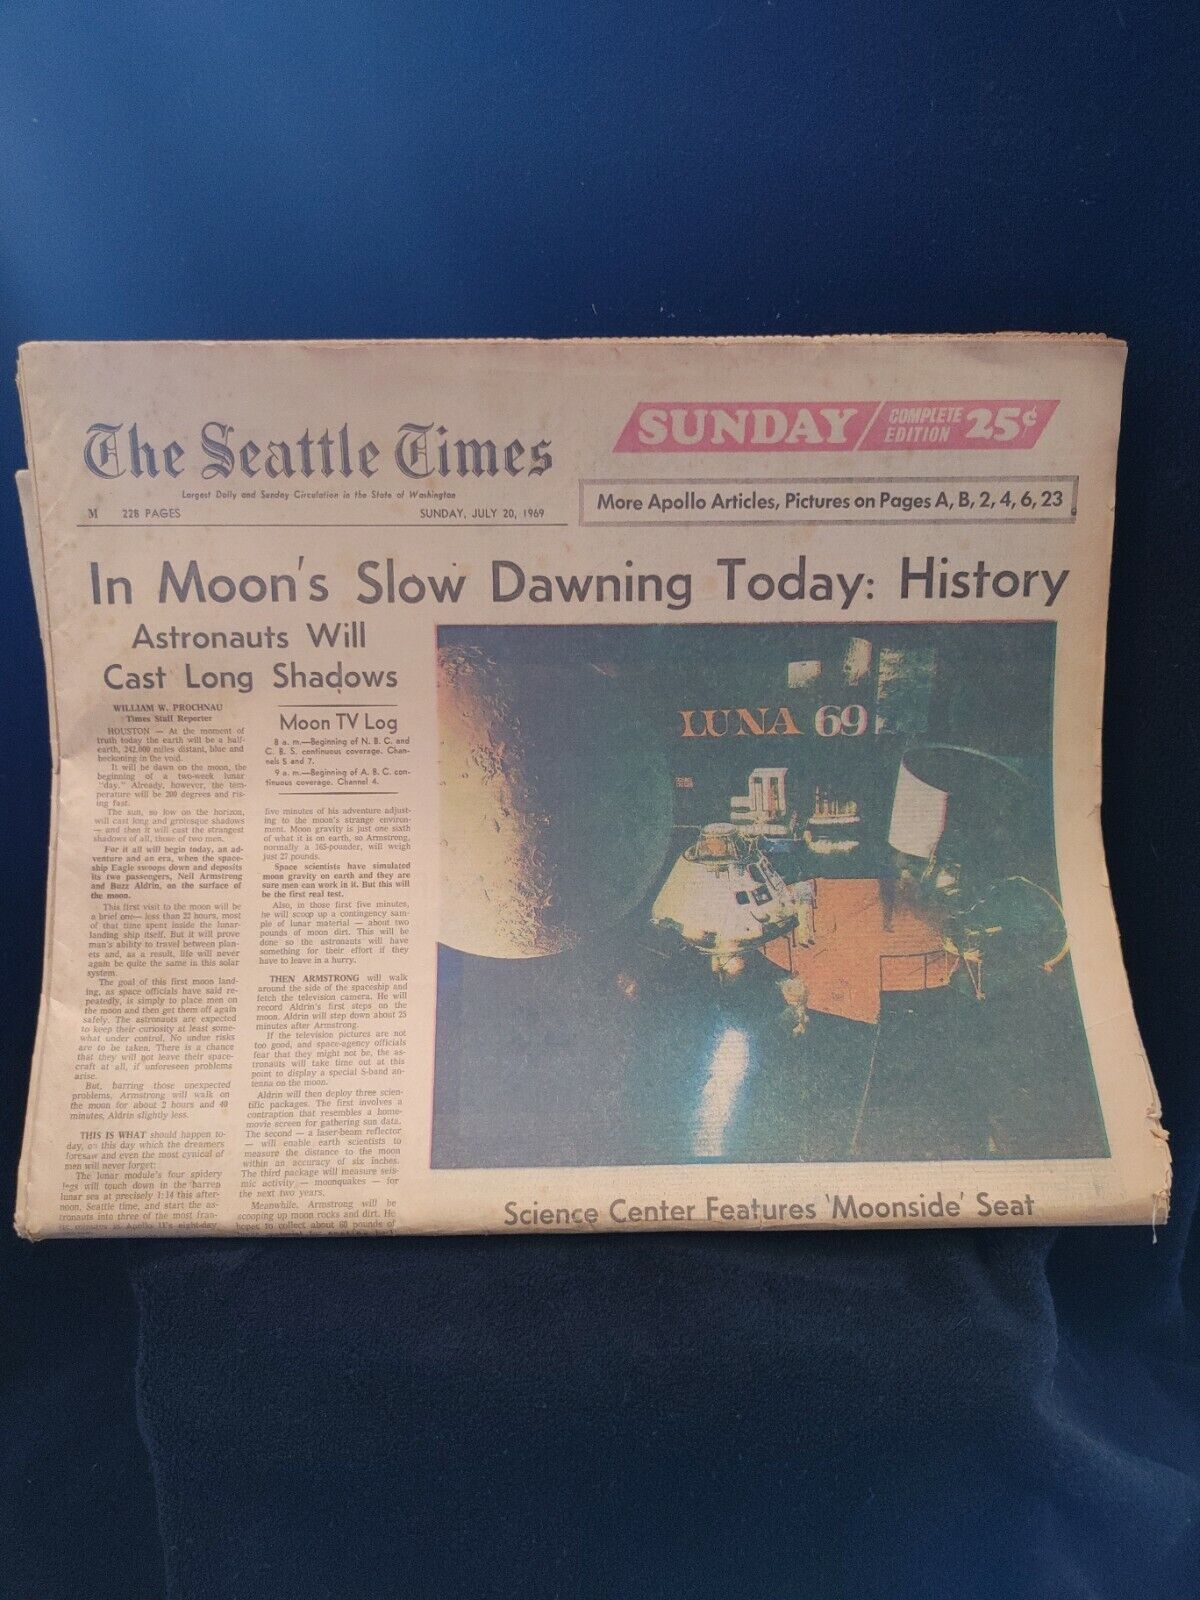 Full Paper Sunday July 20, 1969 - The Seattle Times - Great Shape